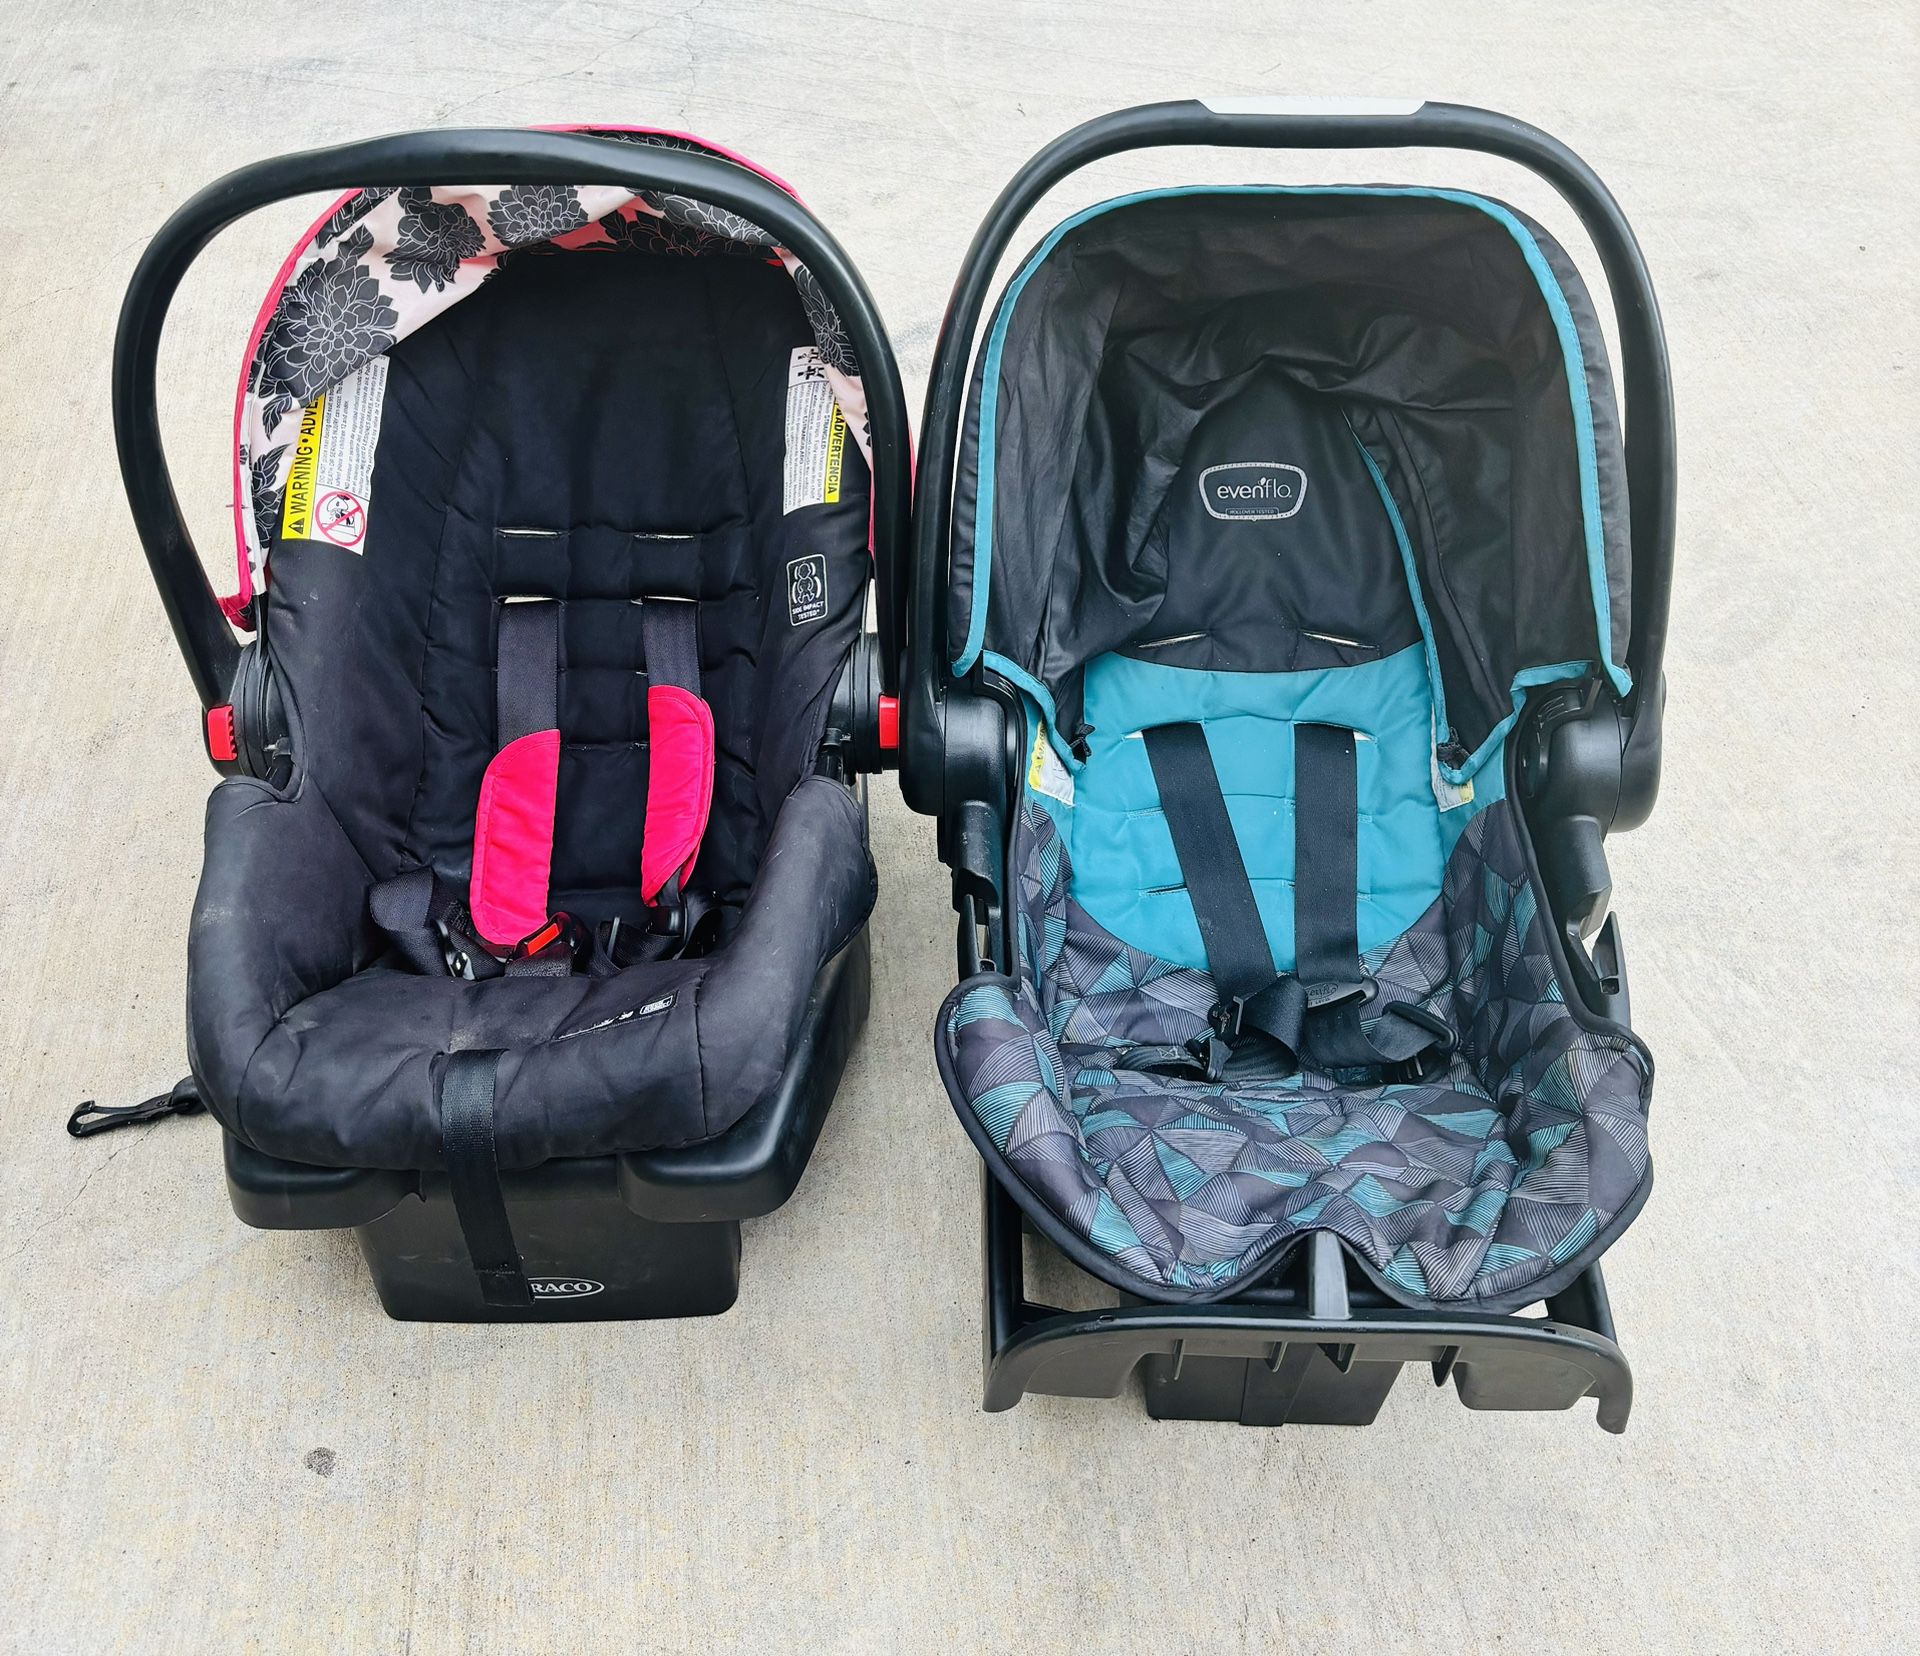 2 baby seats graco and evenflo pink and green